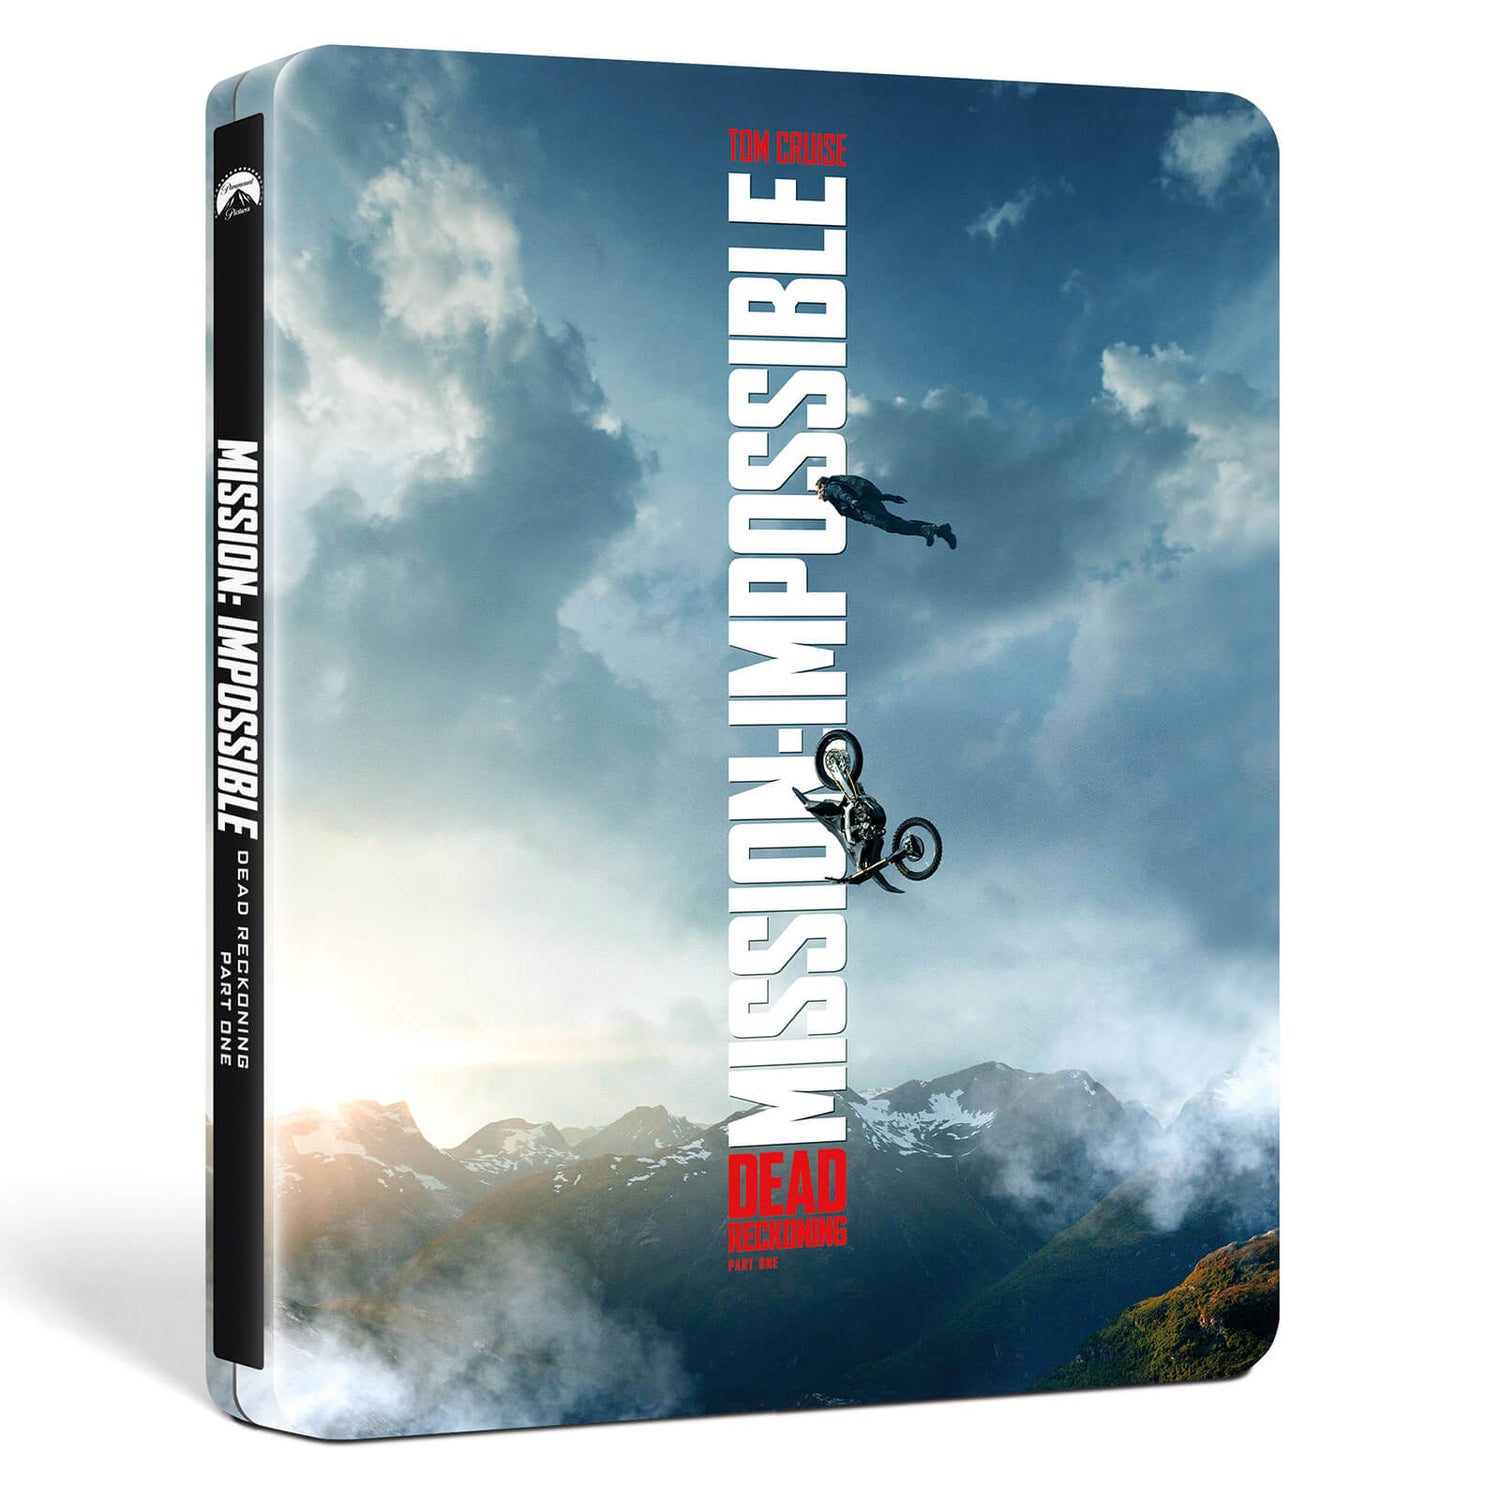 Mission: Impossible Dead Reckoning Part 1 Bike Jump Edition 4K Ultra HD Steelbook (includes Blu-ray)